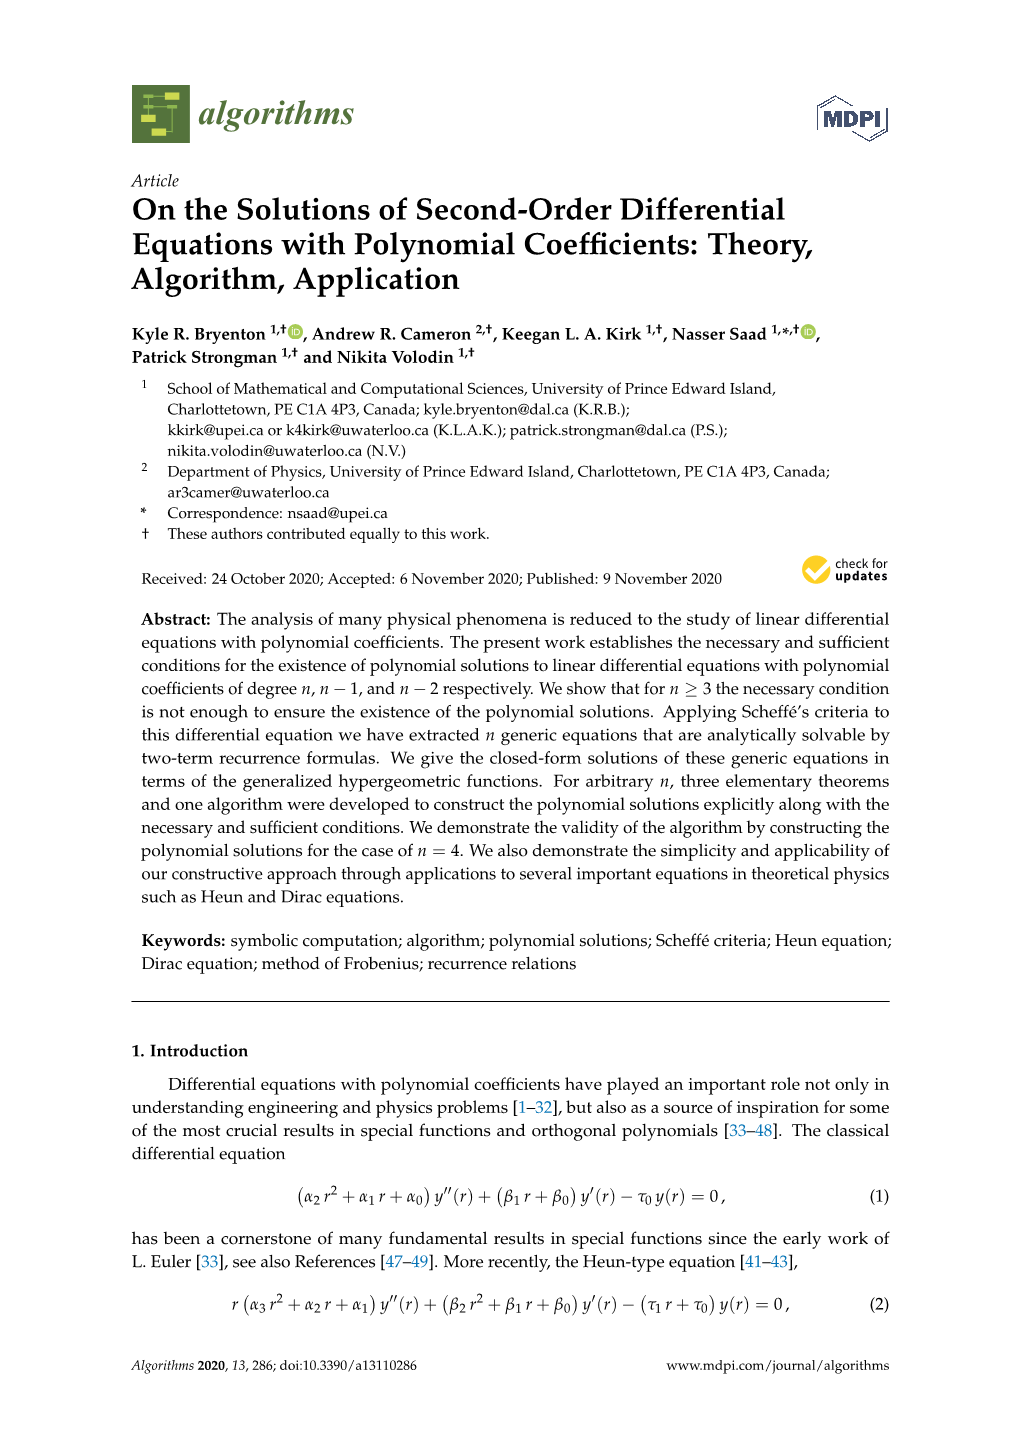 On the Solutions of Second-Order Differential Equations with Polynomial Coefﬁcients: Theory, Algorithm, Application